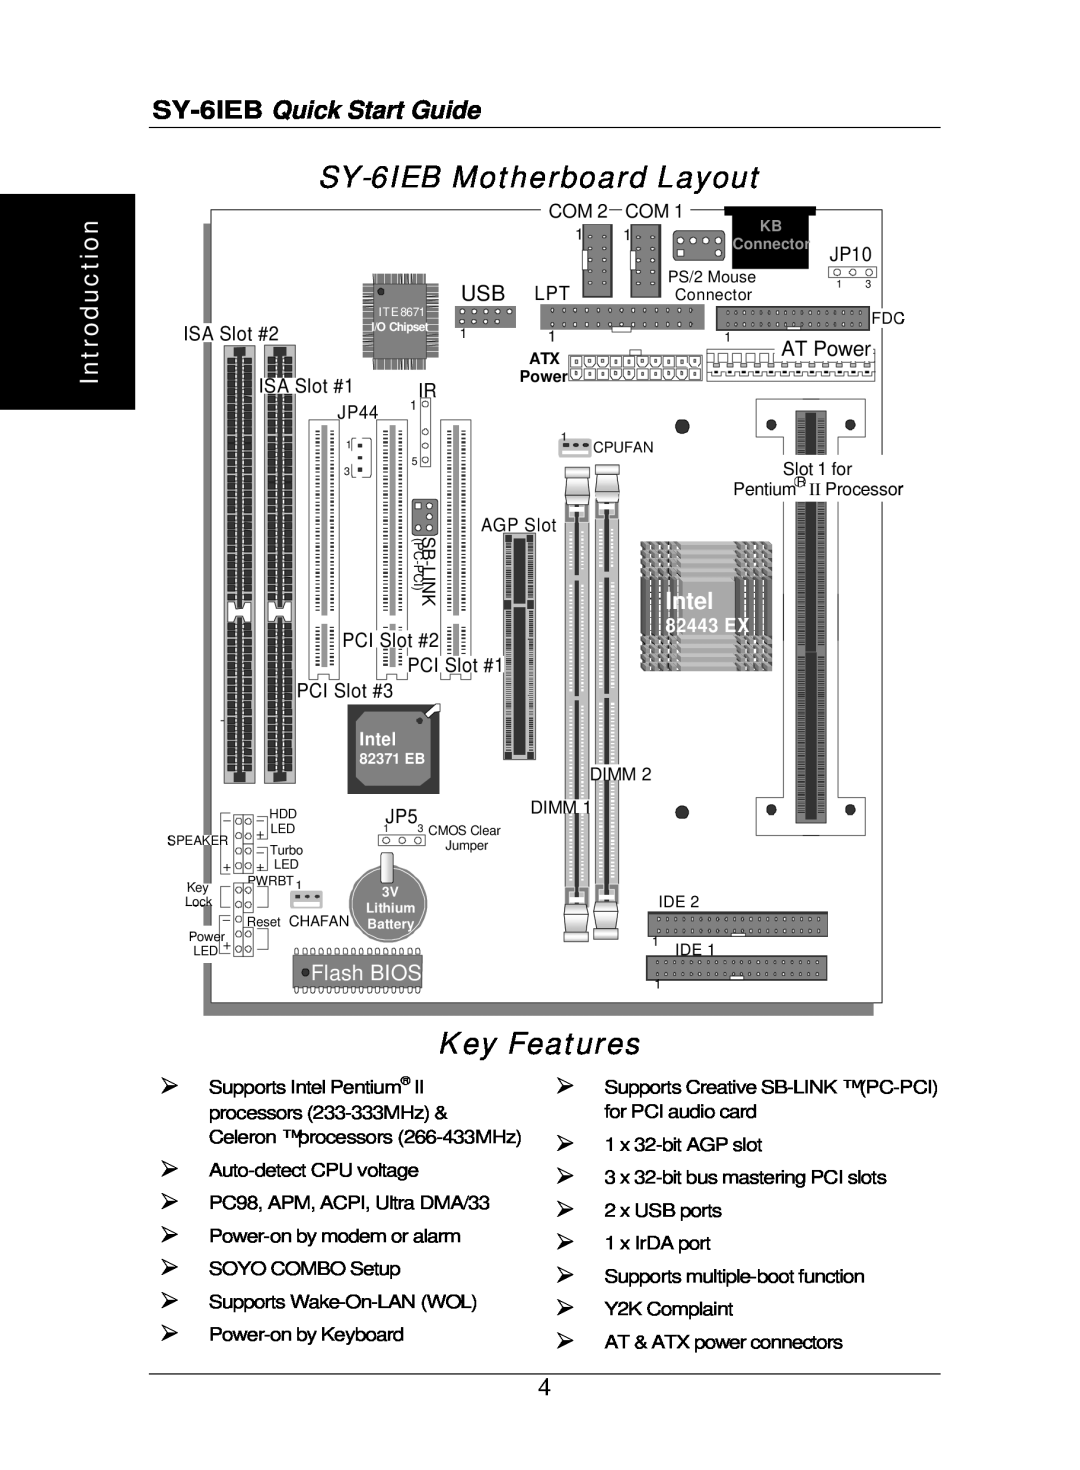 SOYO quick start SY-6IEB Motherboard Layout, Key Features, Introduction, SY-6IEB Quick Start Guide, Intel, Flash BIOS 